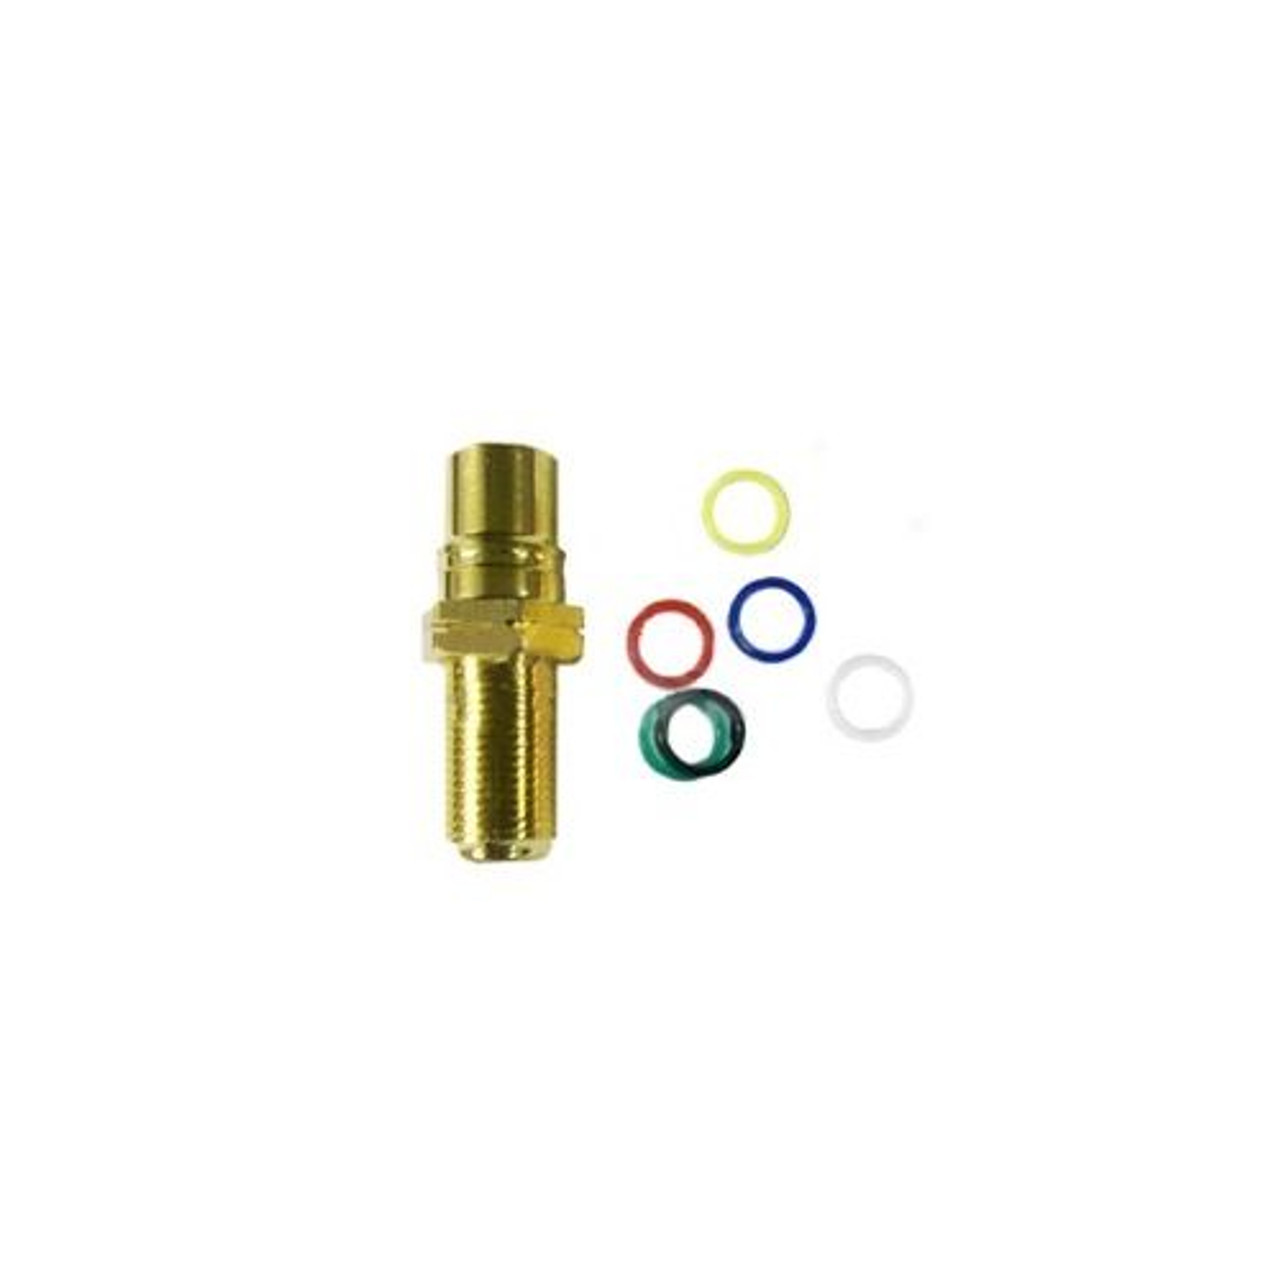 Steren 251-501 RCA Jack Female to F81 Panel Mount Adapter Gold Connector Coupler Audio Video Gold Plate Brass Insert Color Bands Round Adapter Insert Wall Plate RCA to F81 Plug Jack 1 Component Connector, Part # 251501